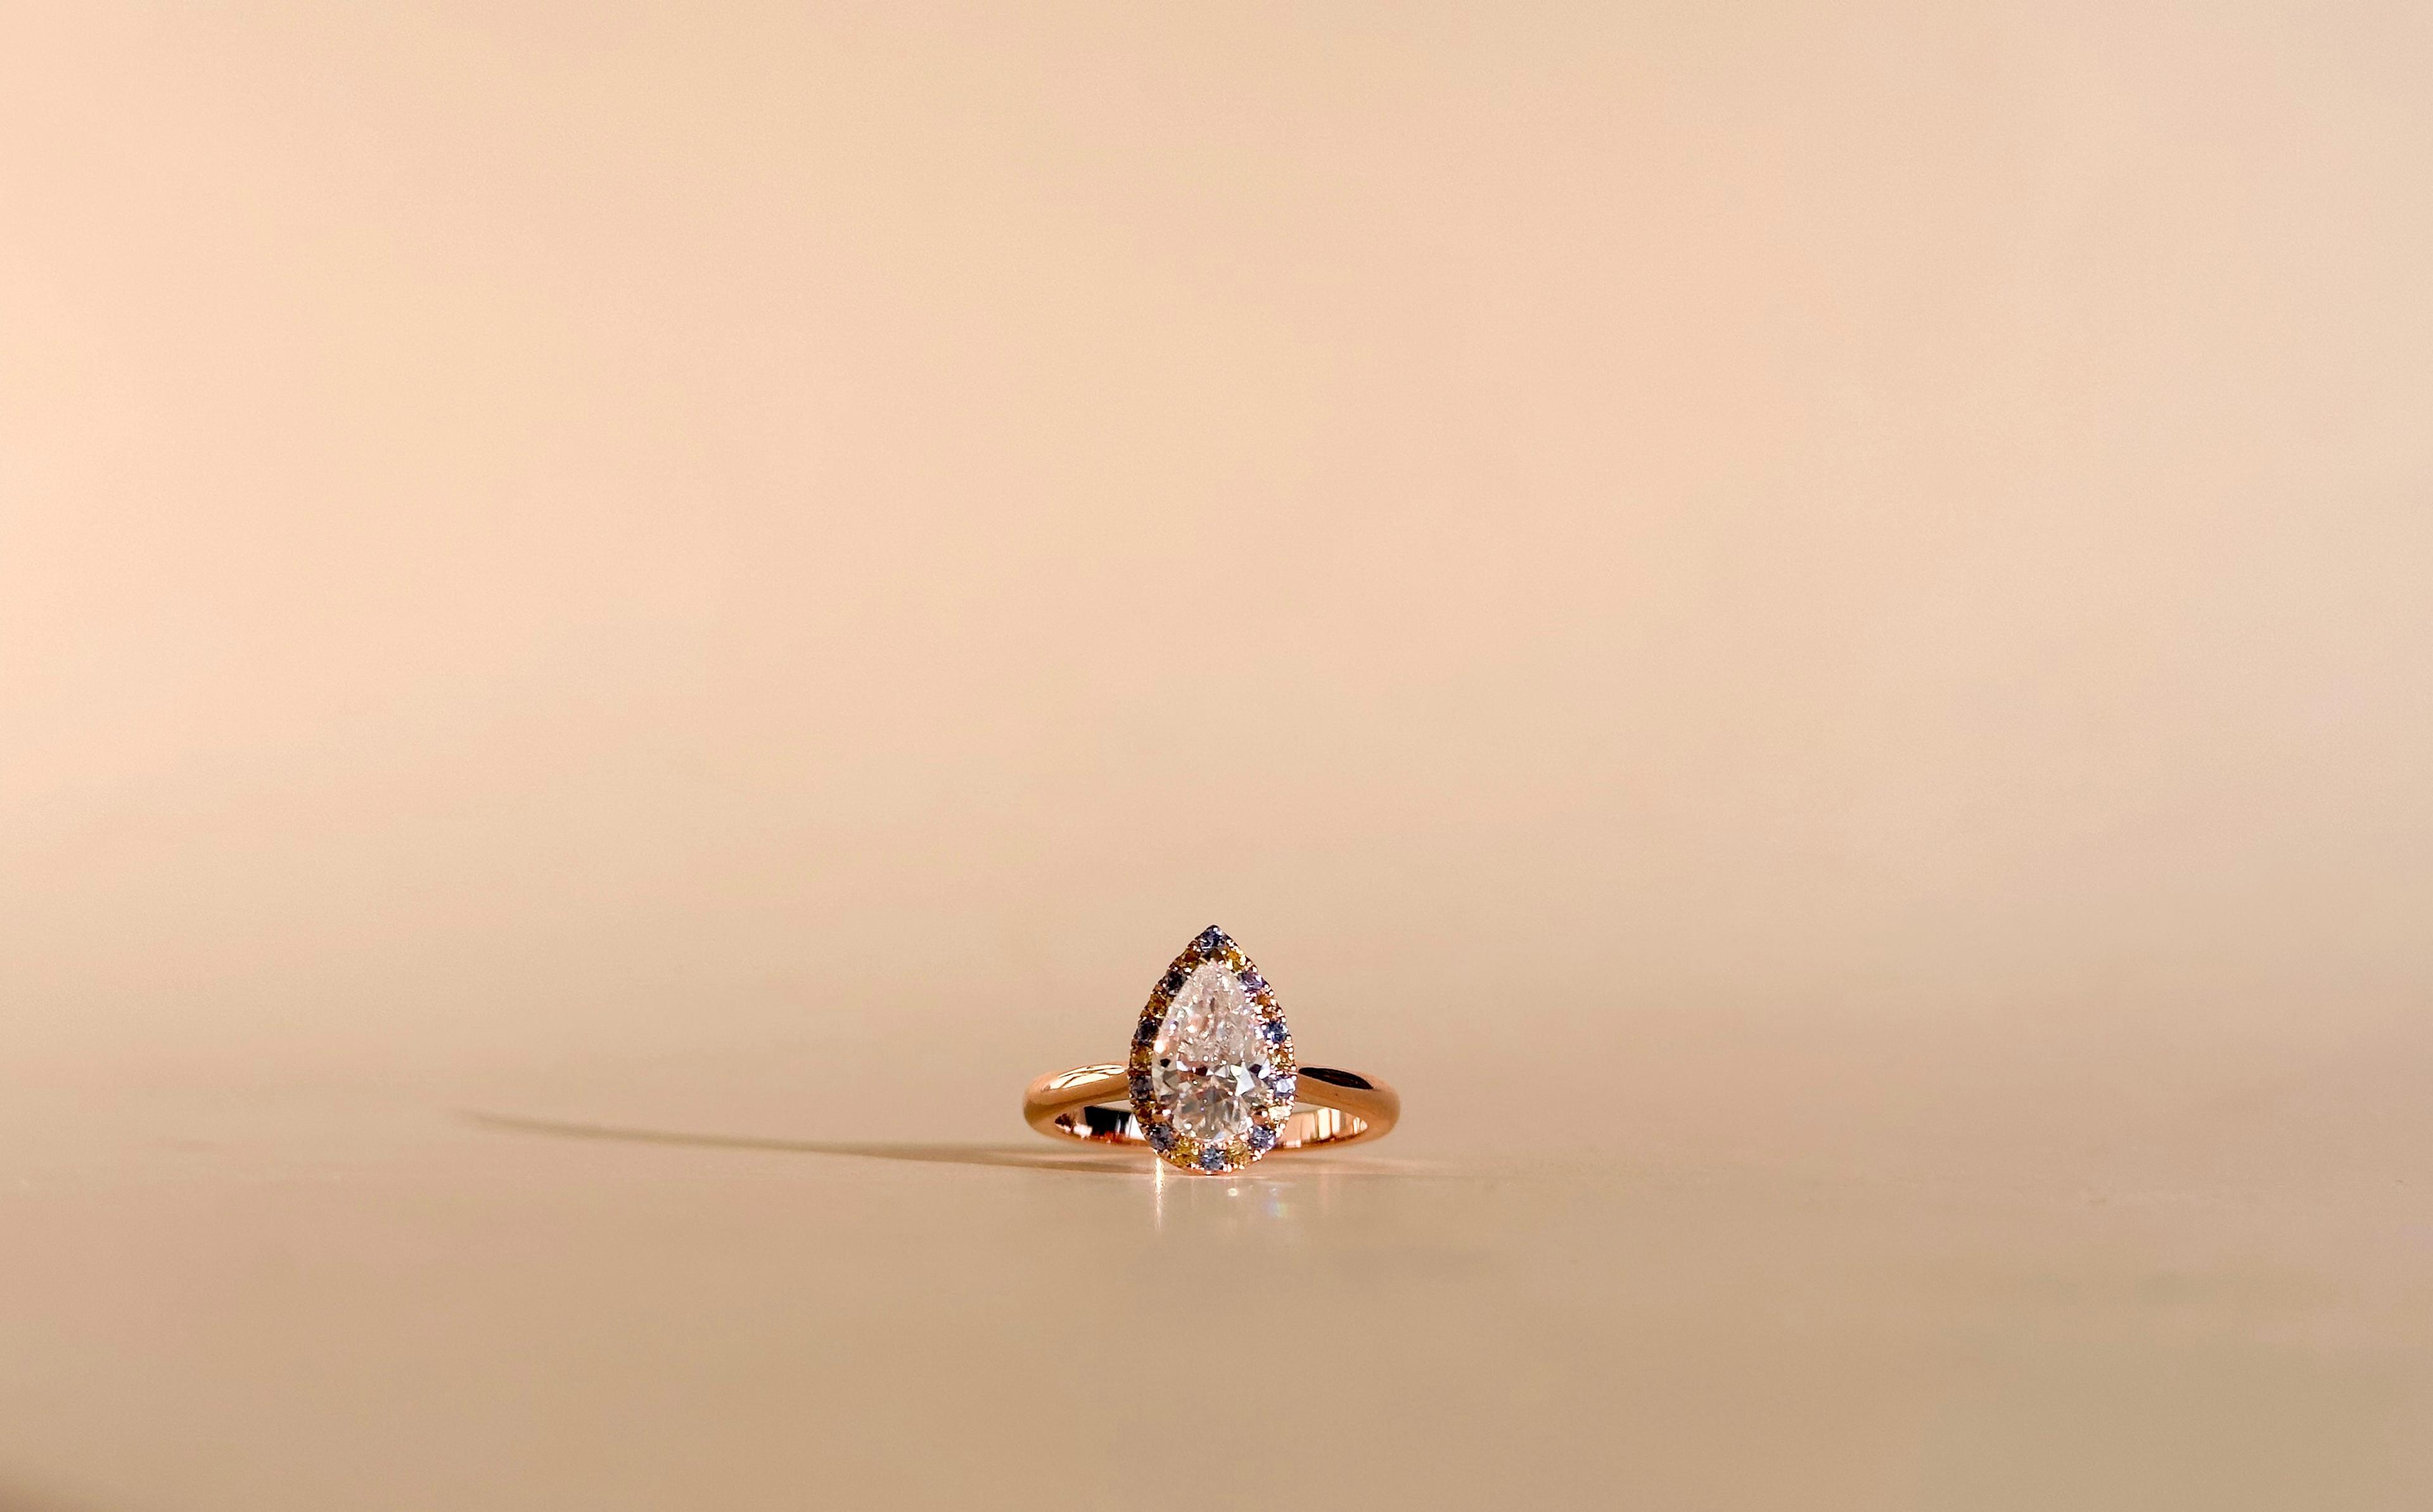 1 carat pear moissanite with different coloured gemstones making up a halo in a 14K yellow gold band